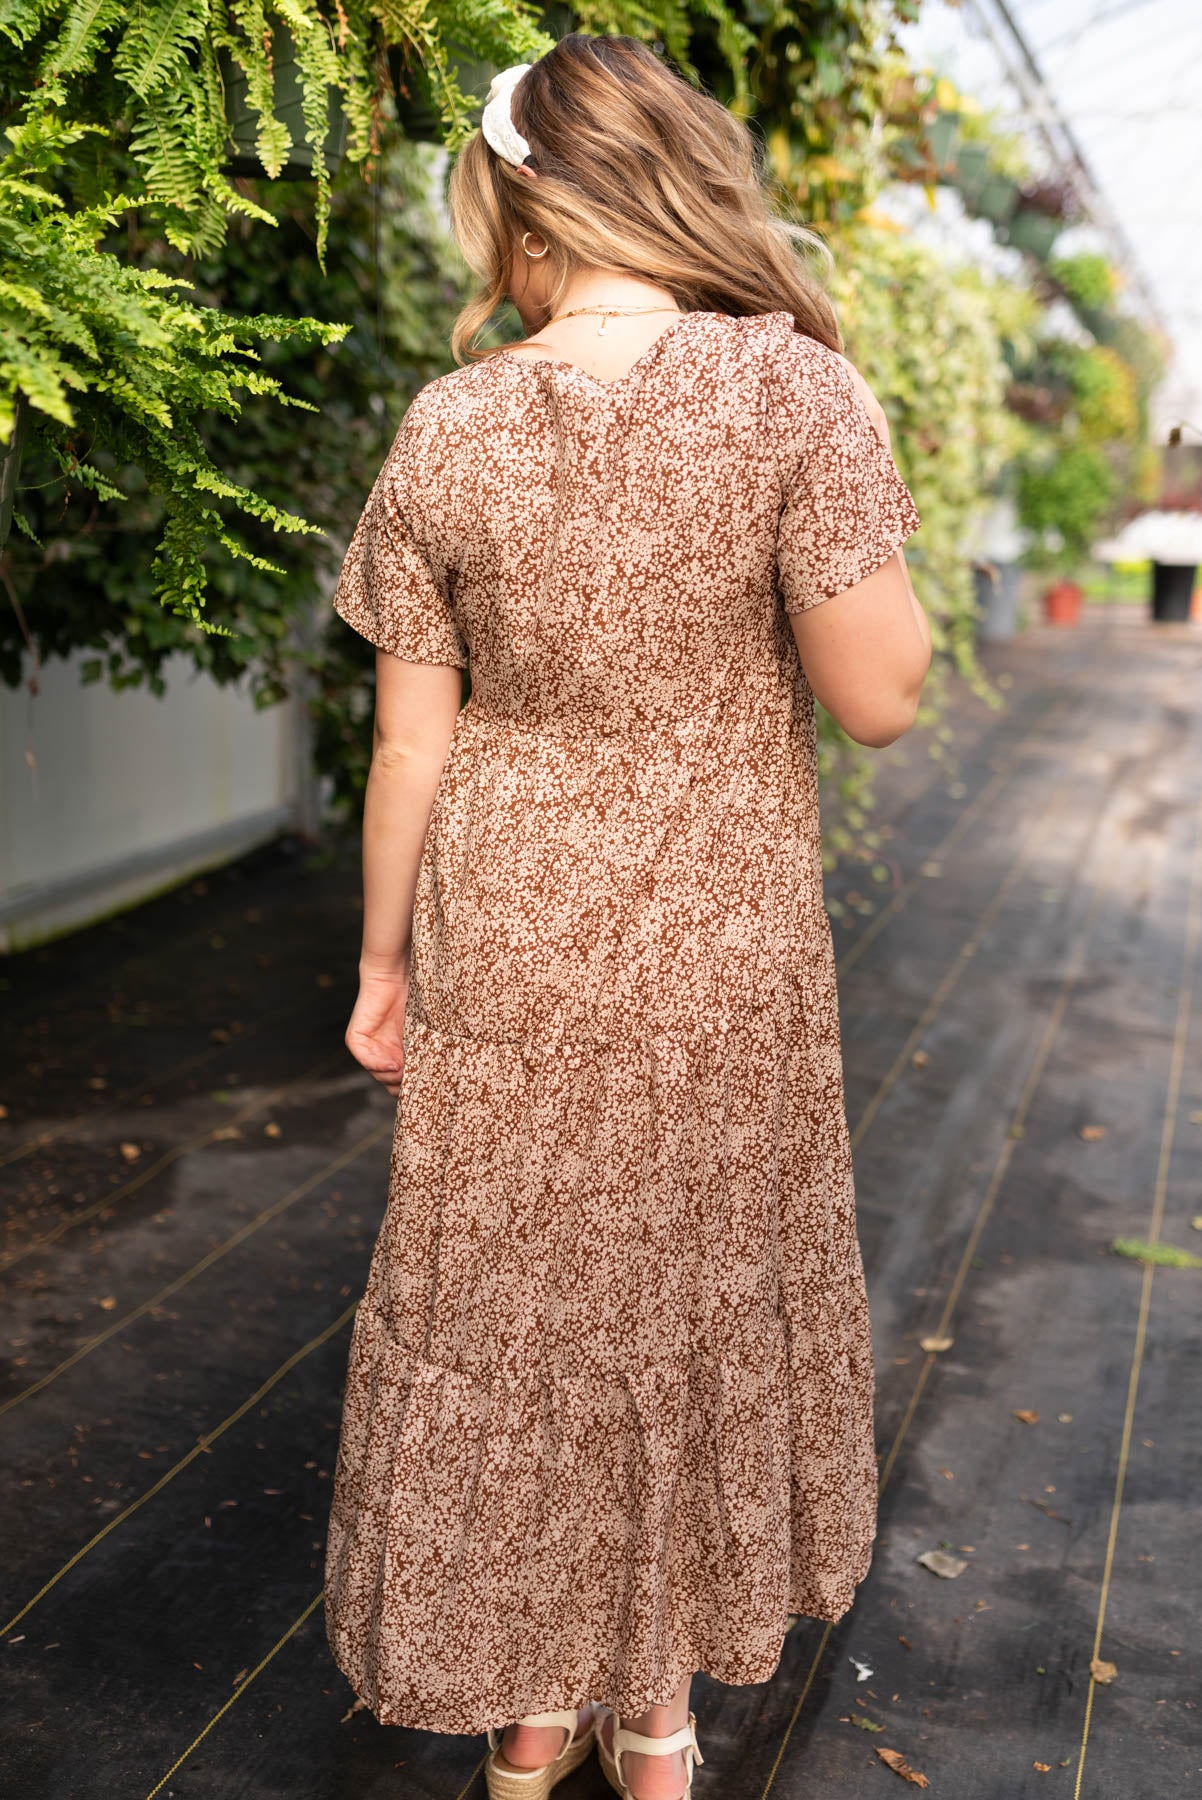 Back view of the brown floral dress